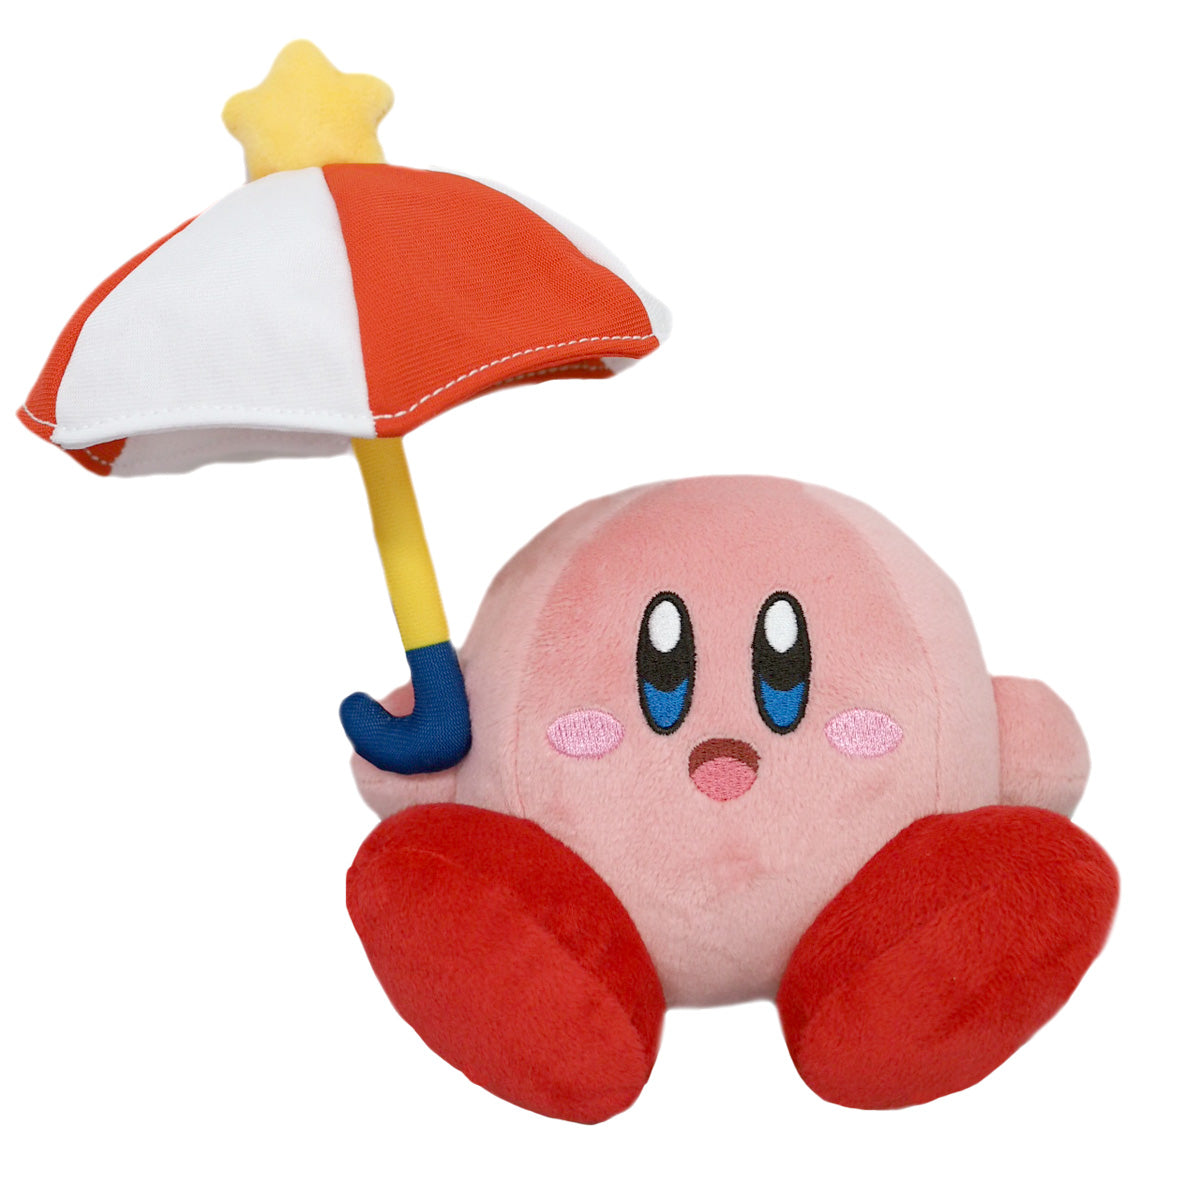 A pink kirby plush with an embroidered open-mouth smile. He is holding a red and white striped umbrella with a yellow star on top.